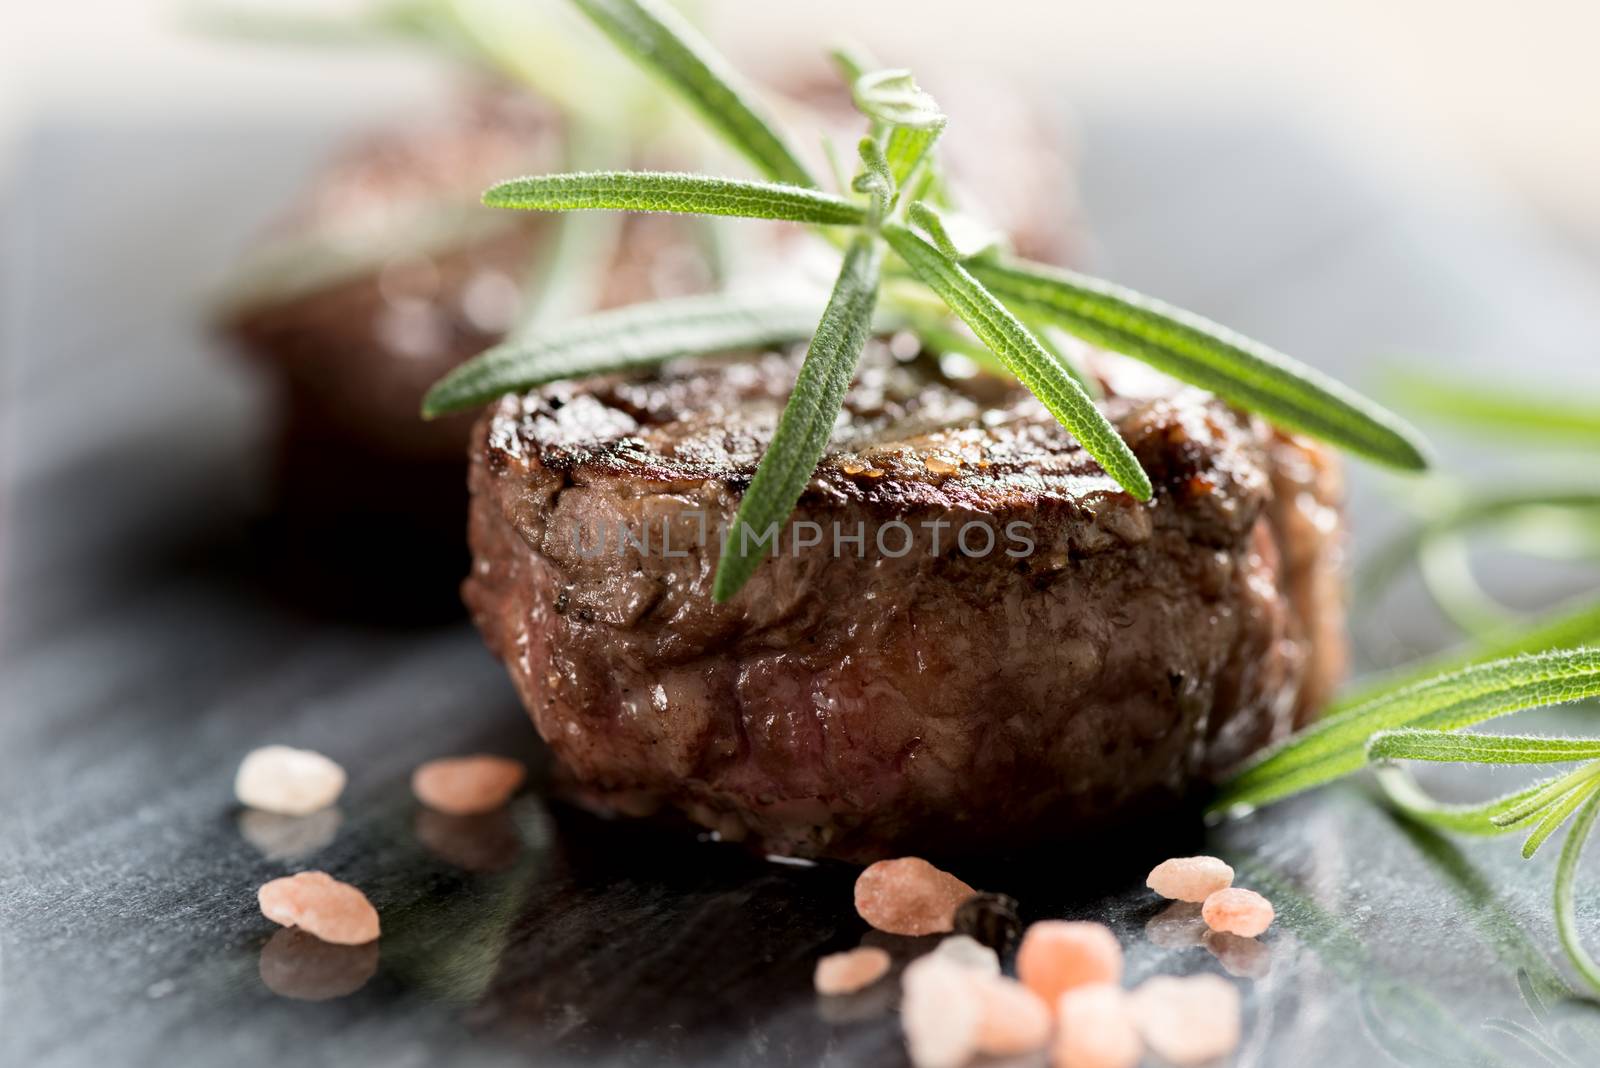 Grilled steak with rosemary by Nanisimova